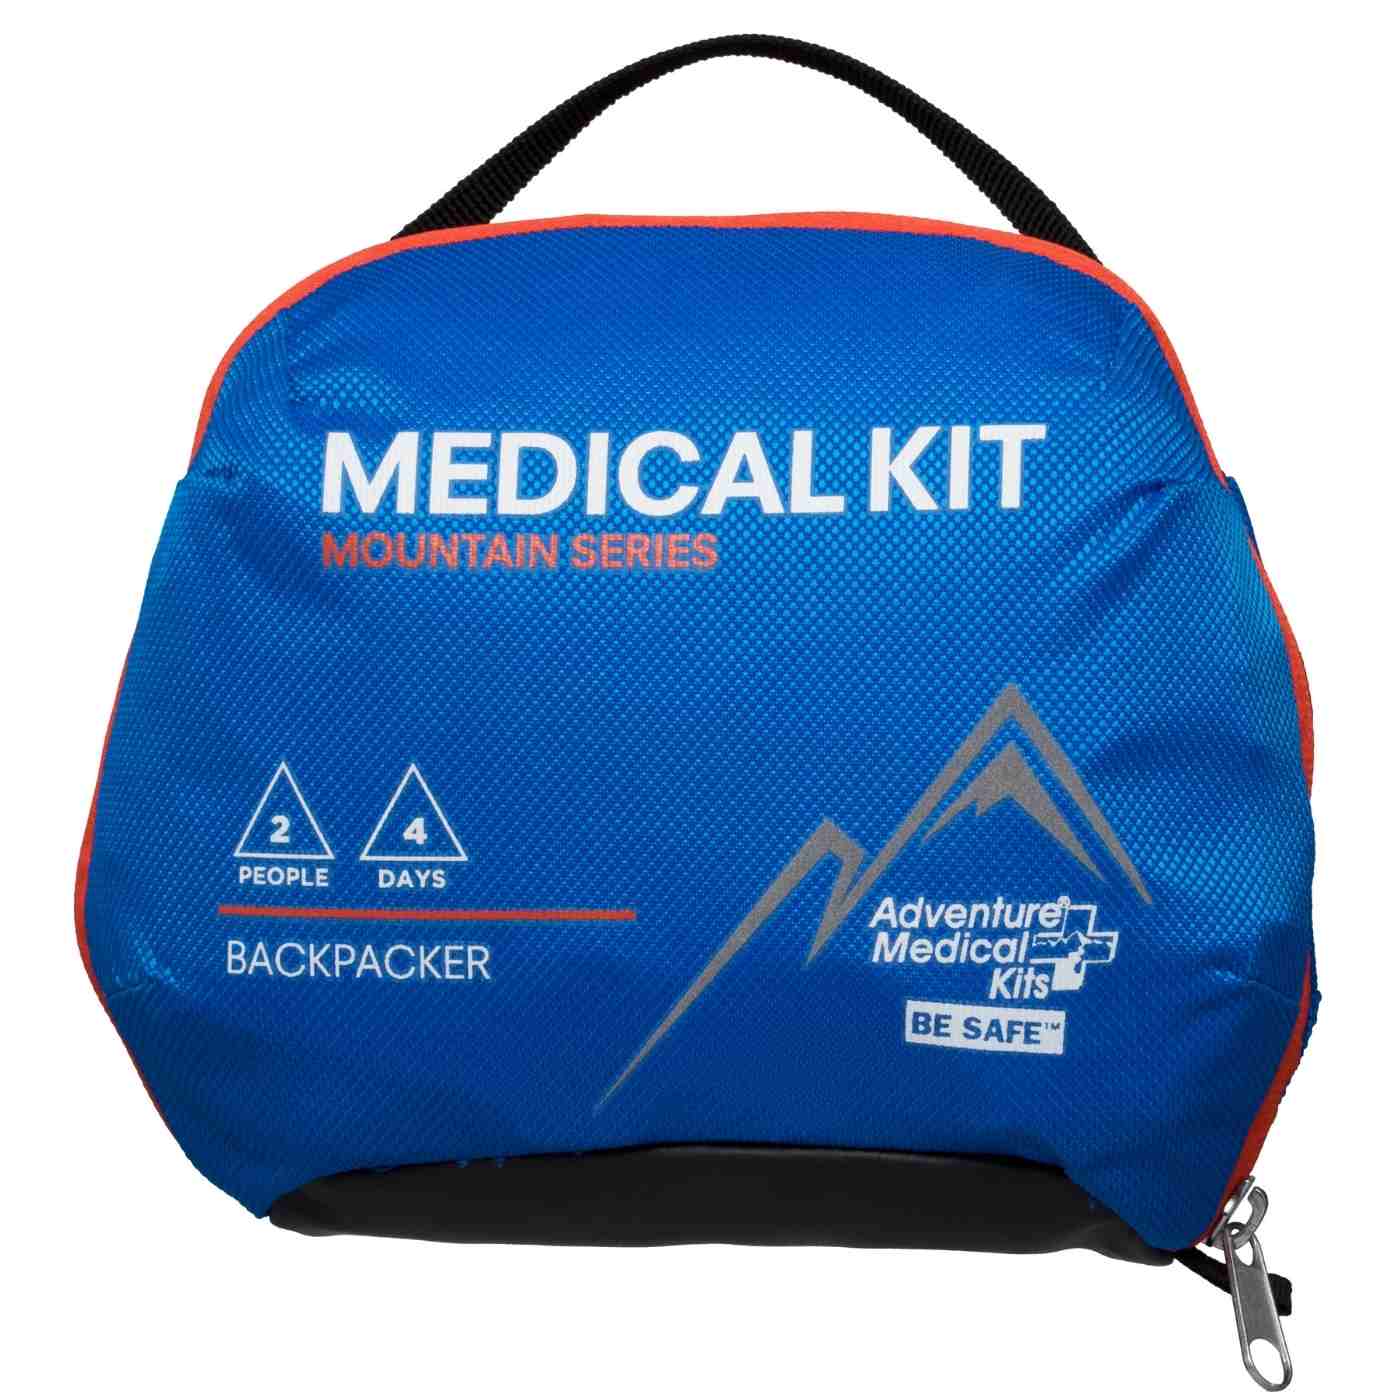 Mountain Series Medical Kit - Backpacker front